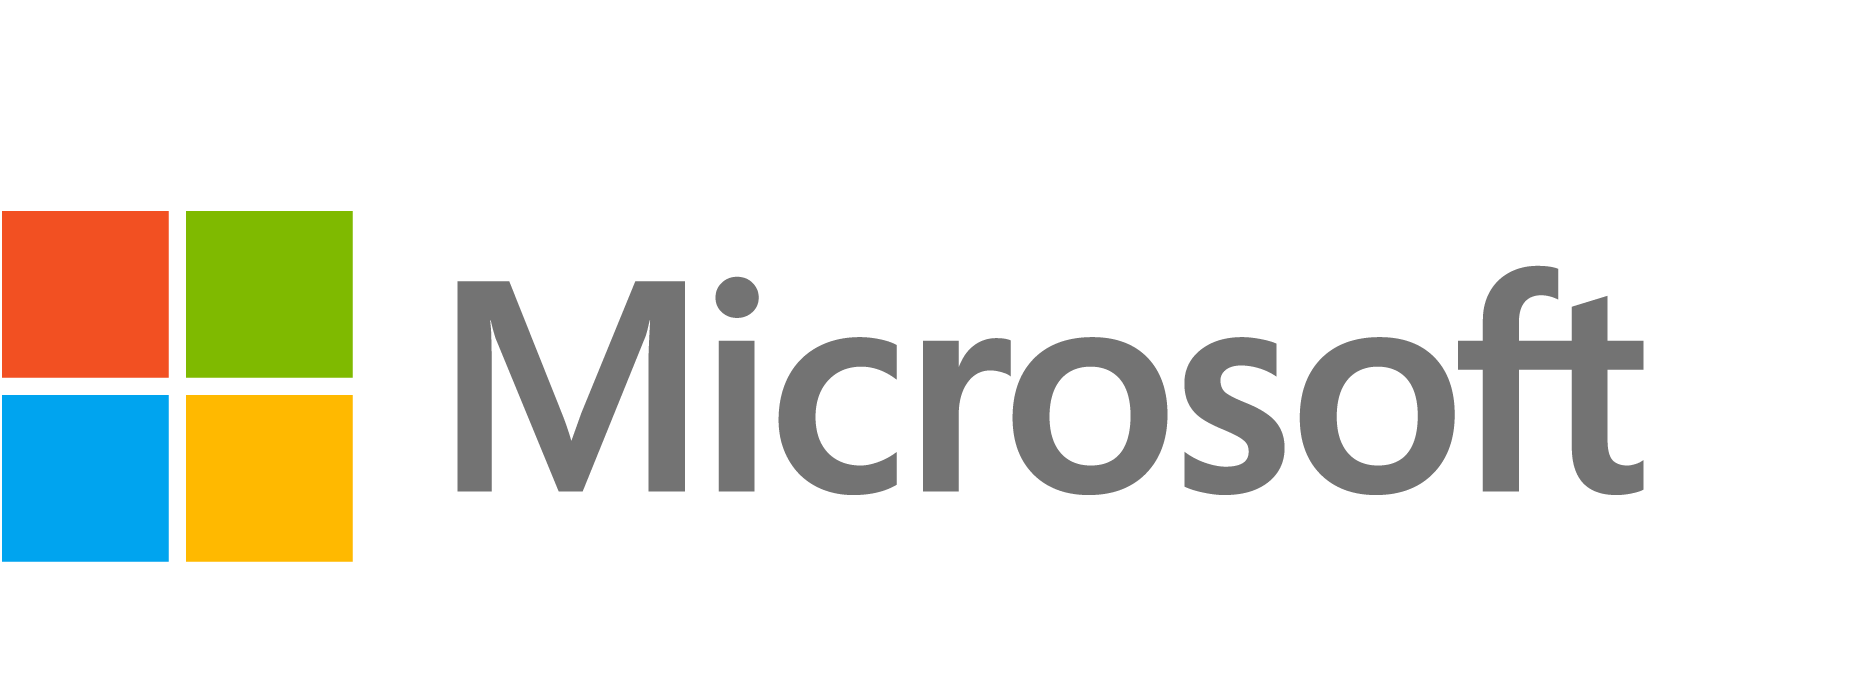 ACM CCS 2021 on Twitter: "Thanks @Microsoft for being a Gold Sponsor of  #ccs20!… "